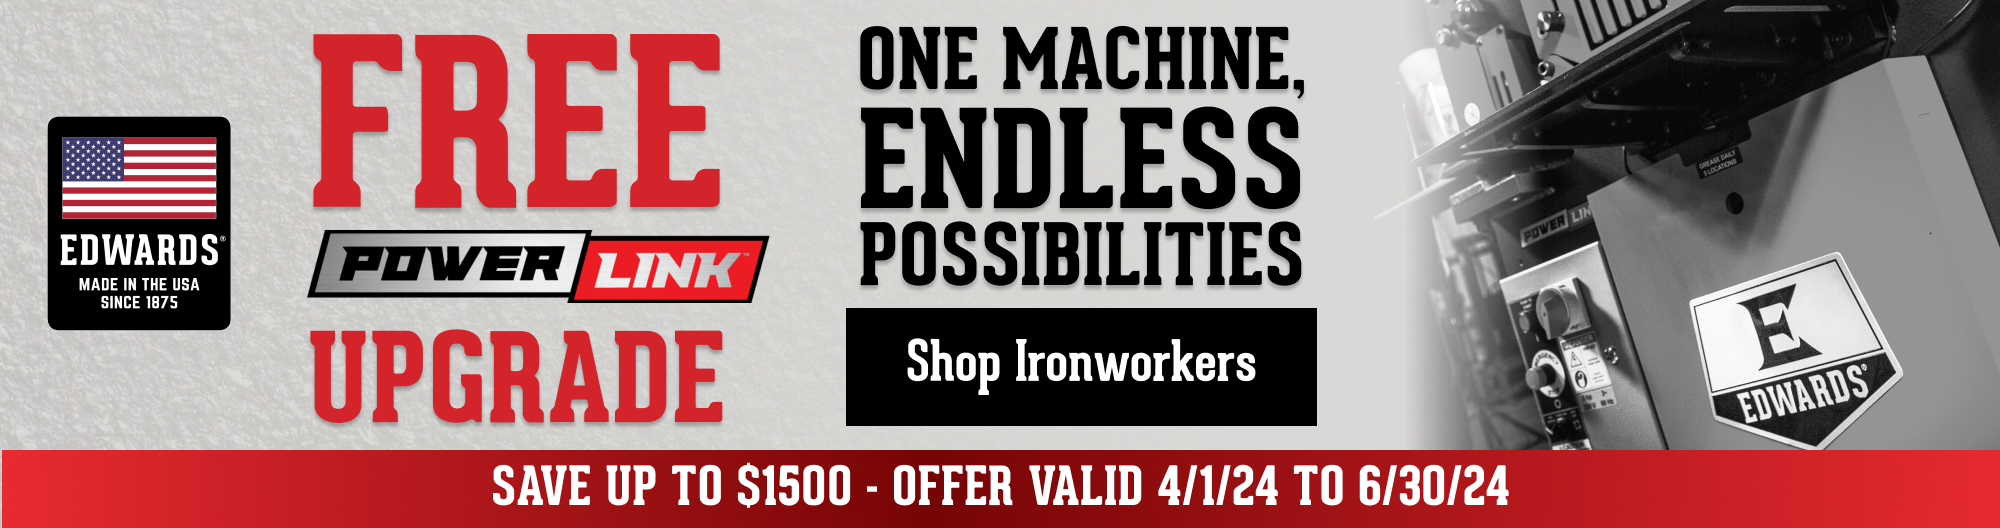 Edwards Manufacturing Hydraulic Ironworker Machines for Sale